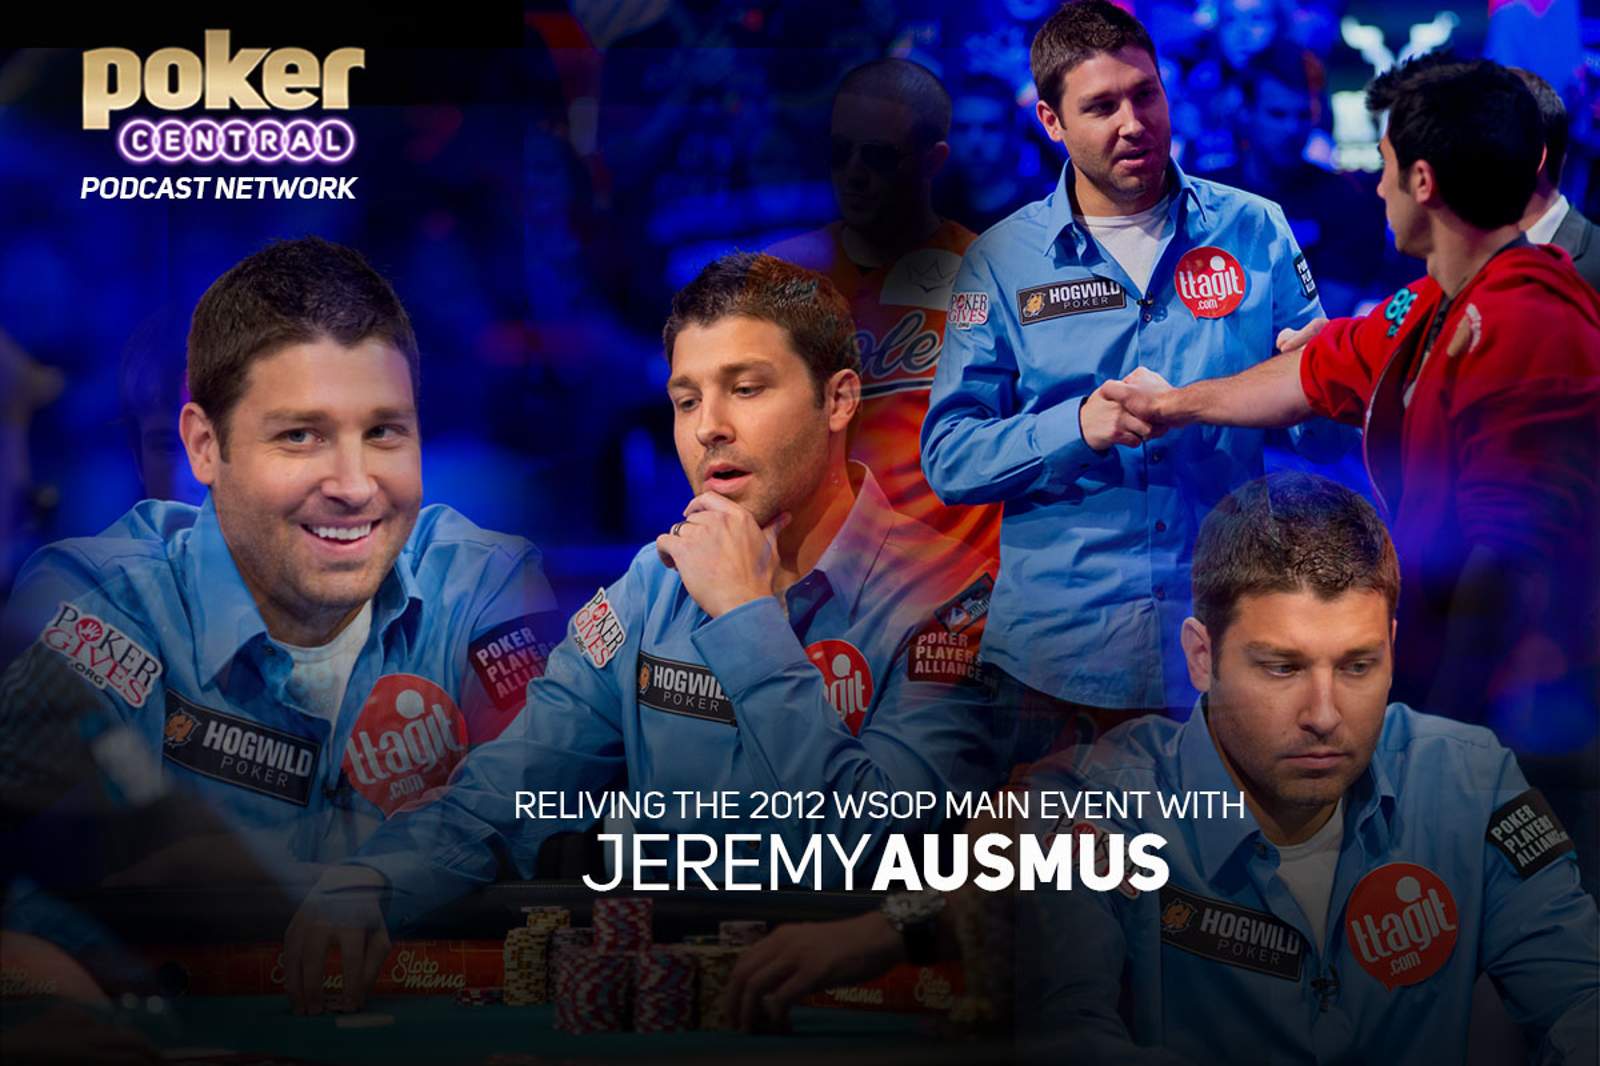 Reliving the 2012 WSOP Main Event with Jeremy Ausmus